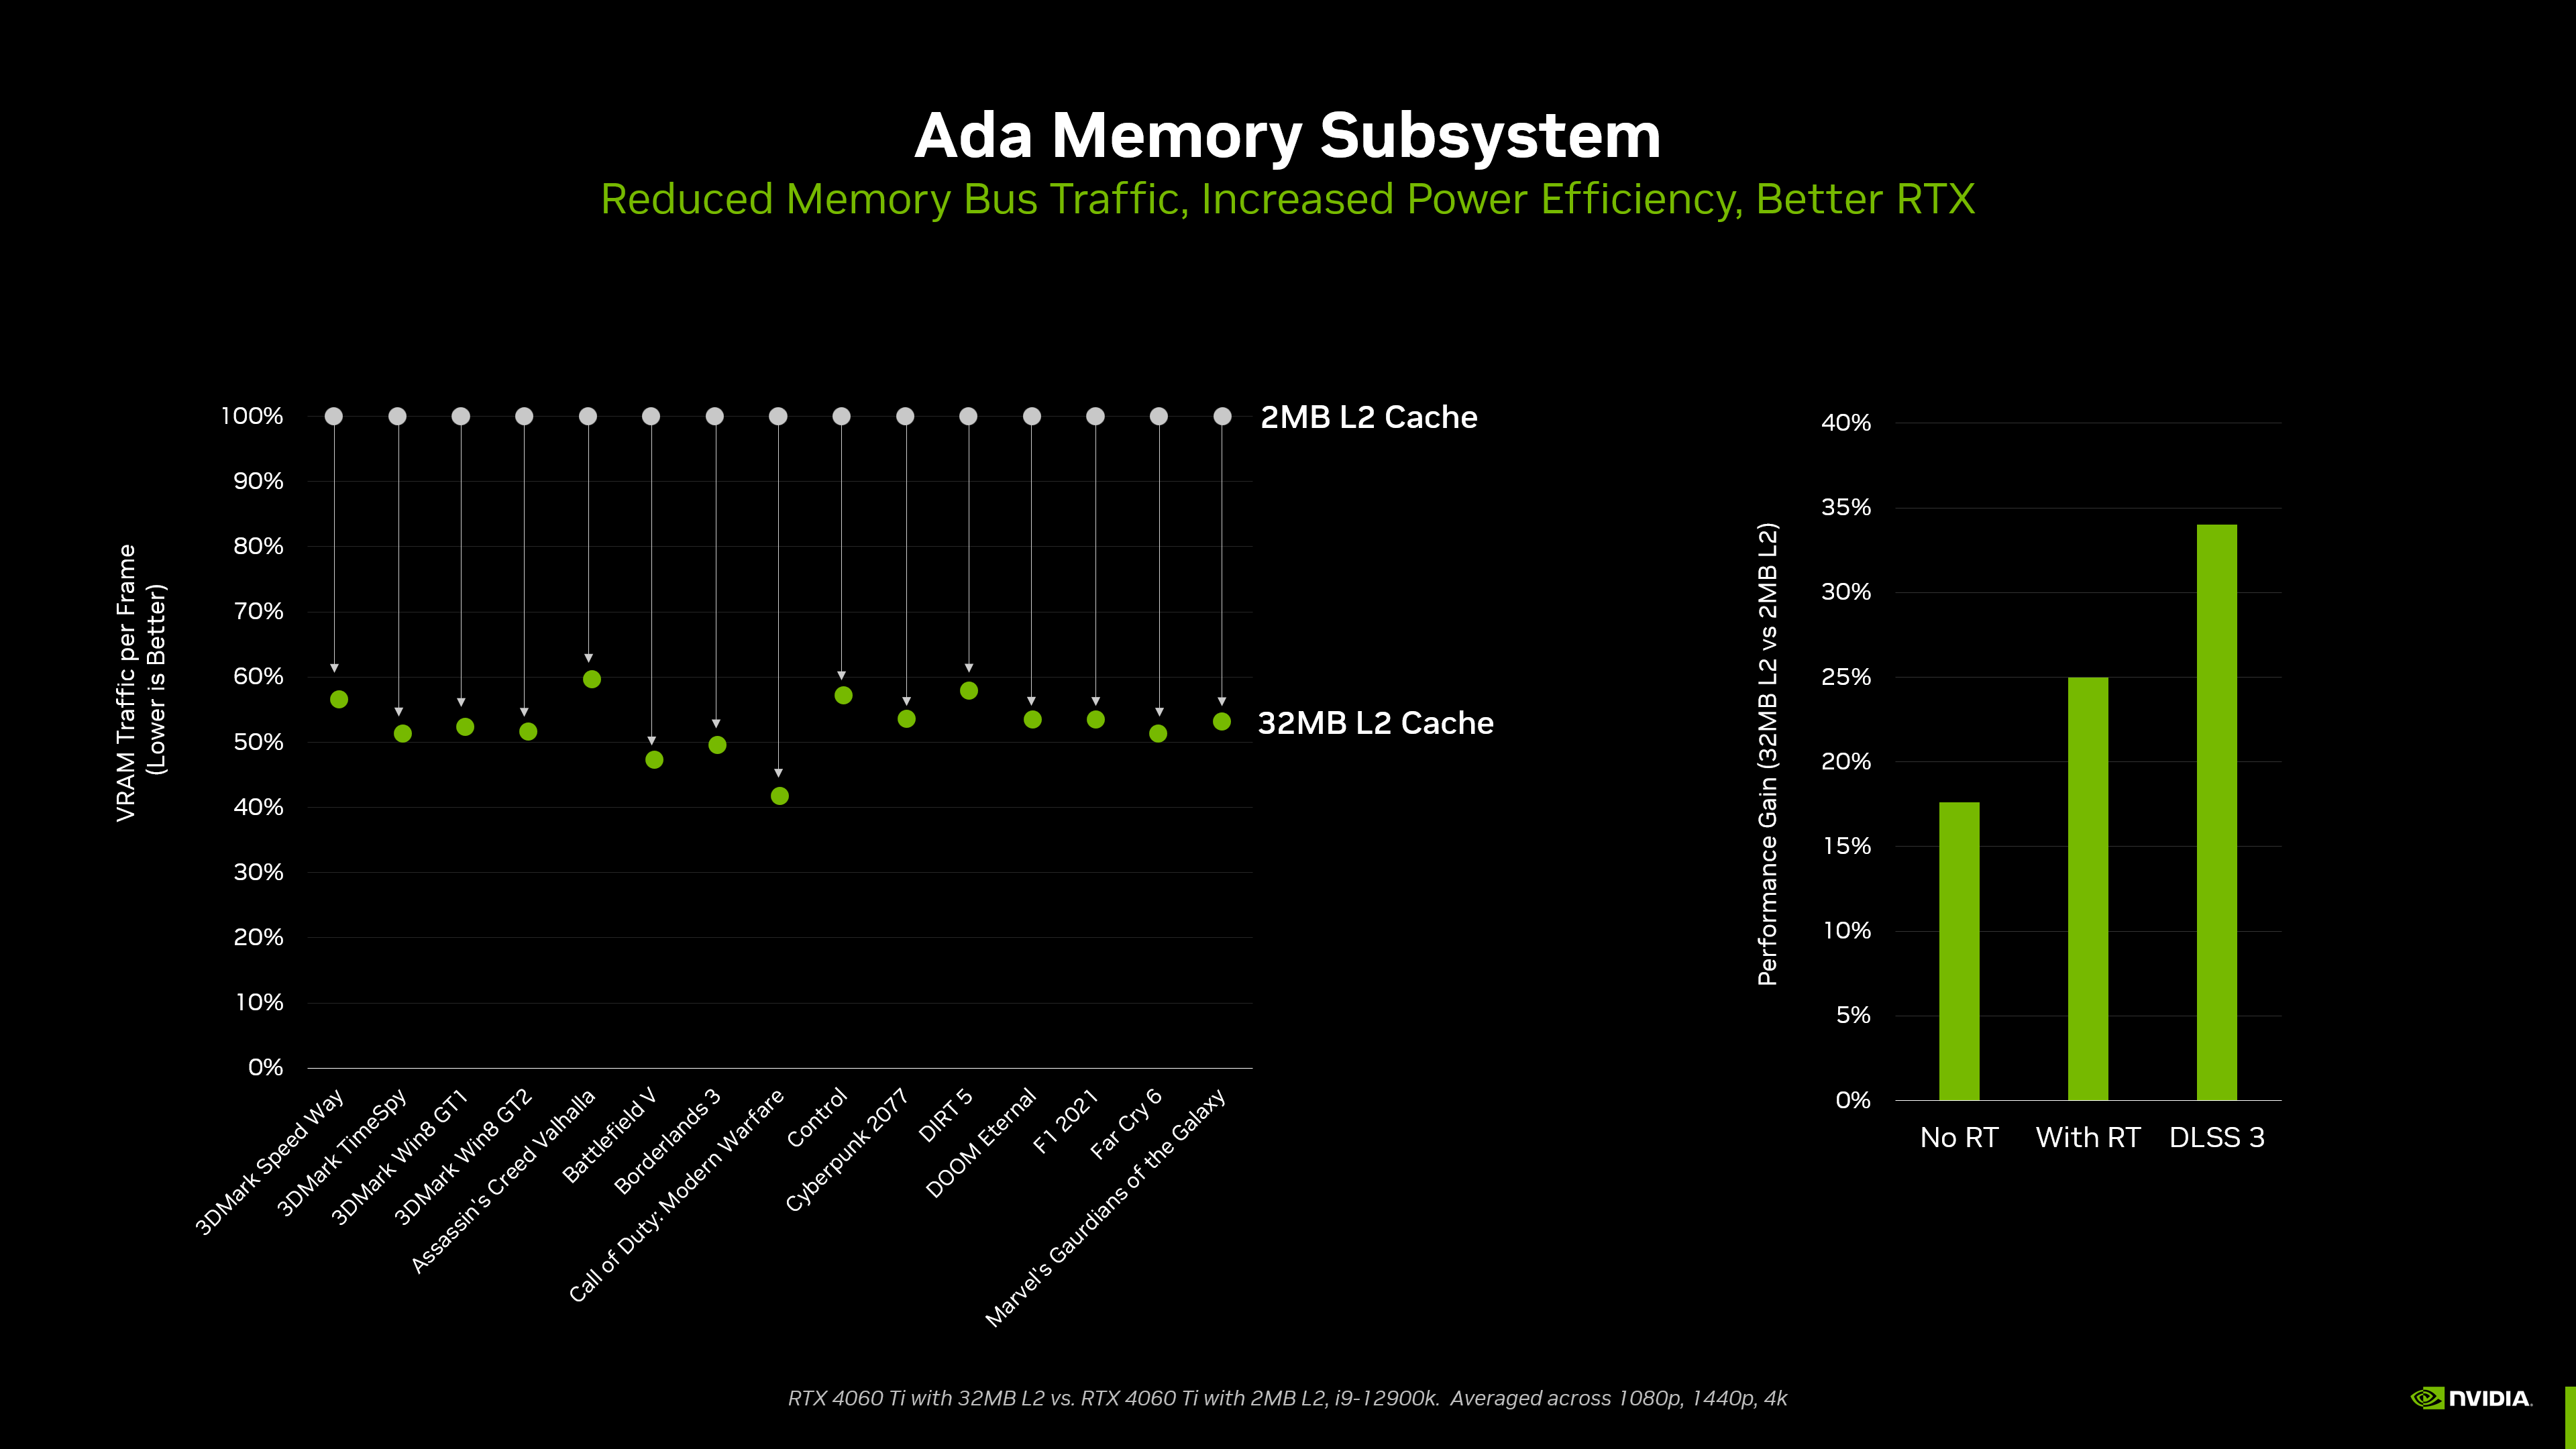 nvidia-geforce-ada-lovelace-memory-subsystem-performance-and-efficiency-improvements.png